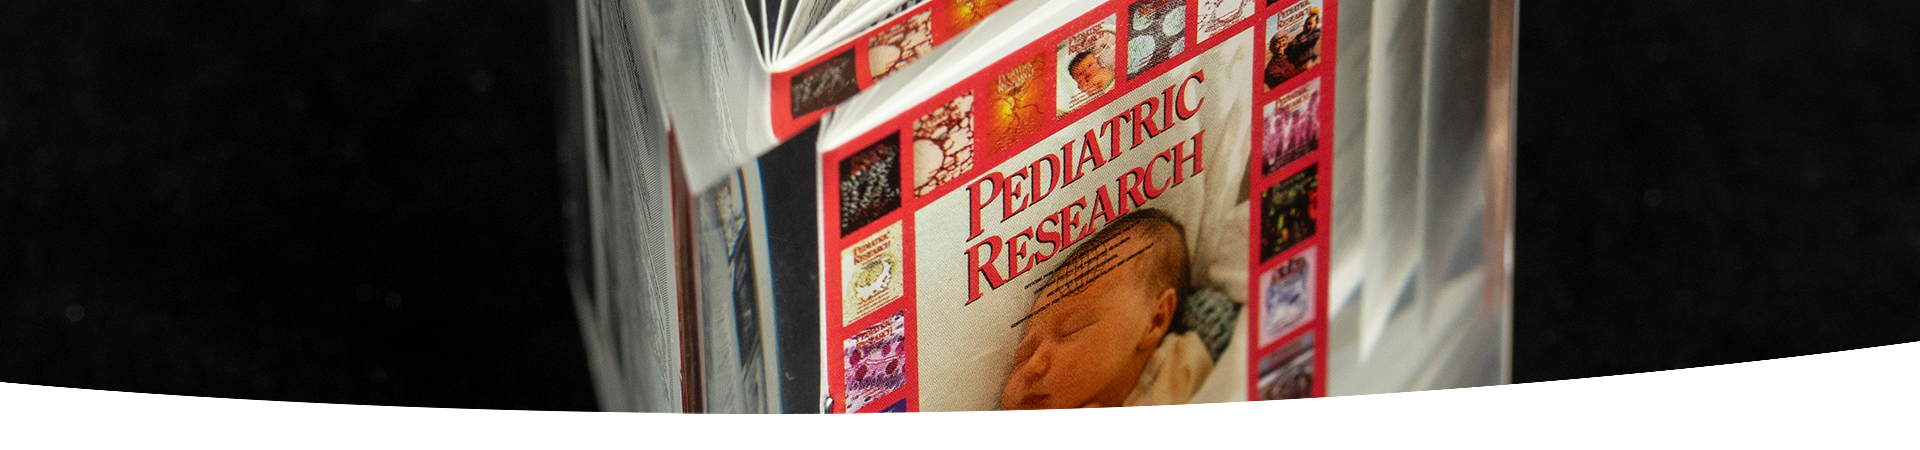 The cover of the 'Pediatric Research' journal